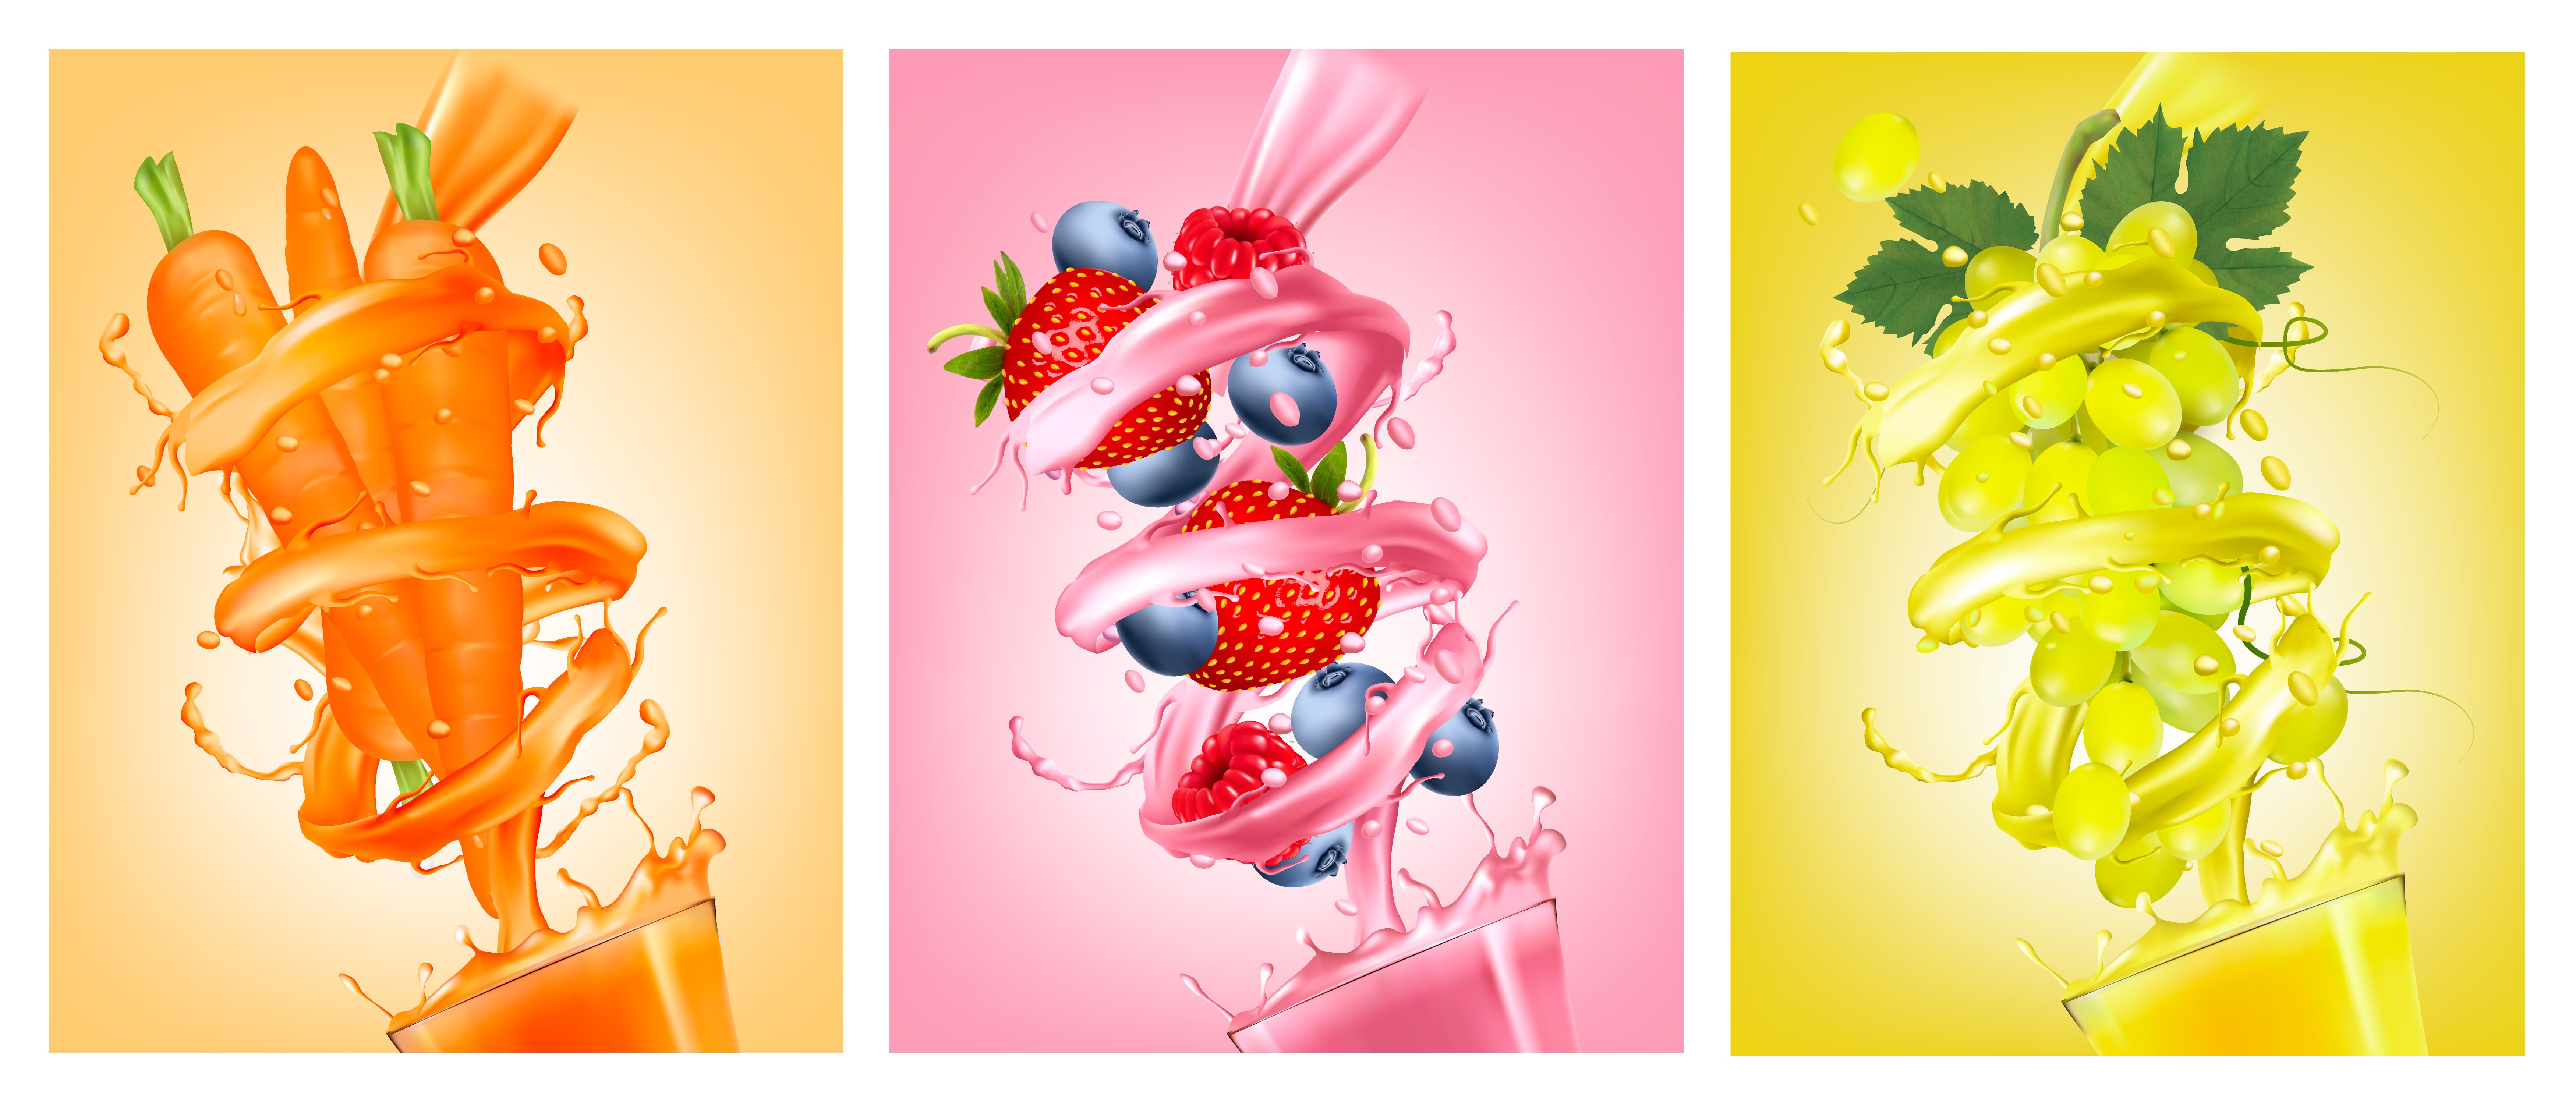 Fruit in juice splashes cover image.